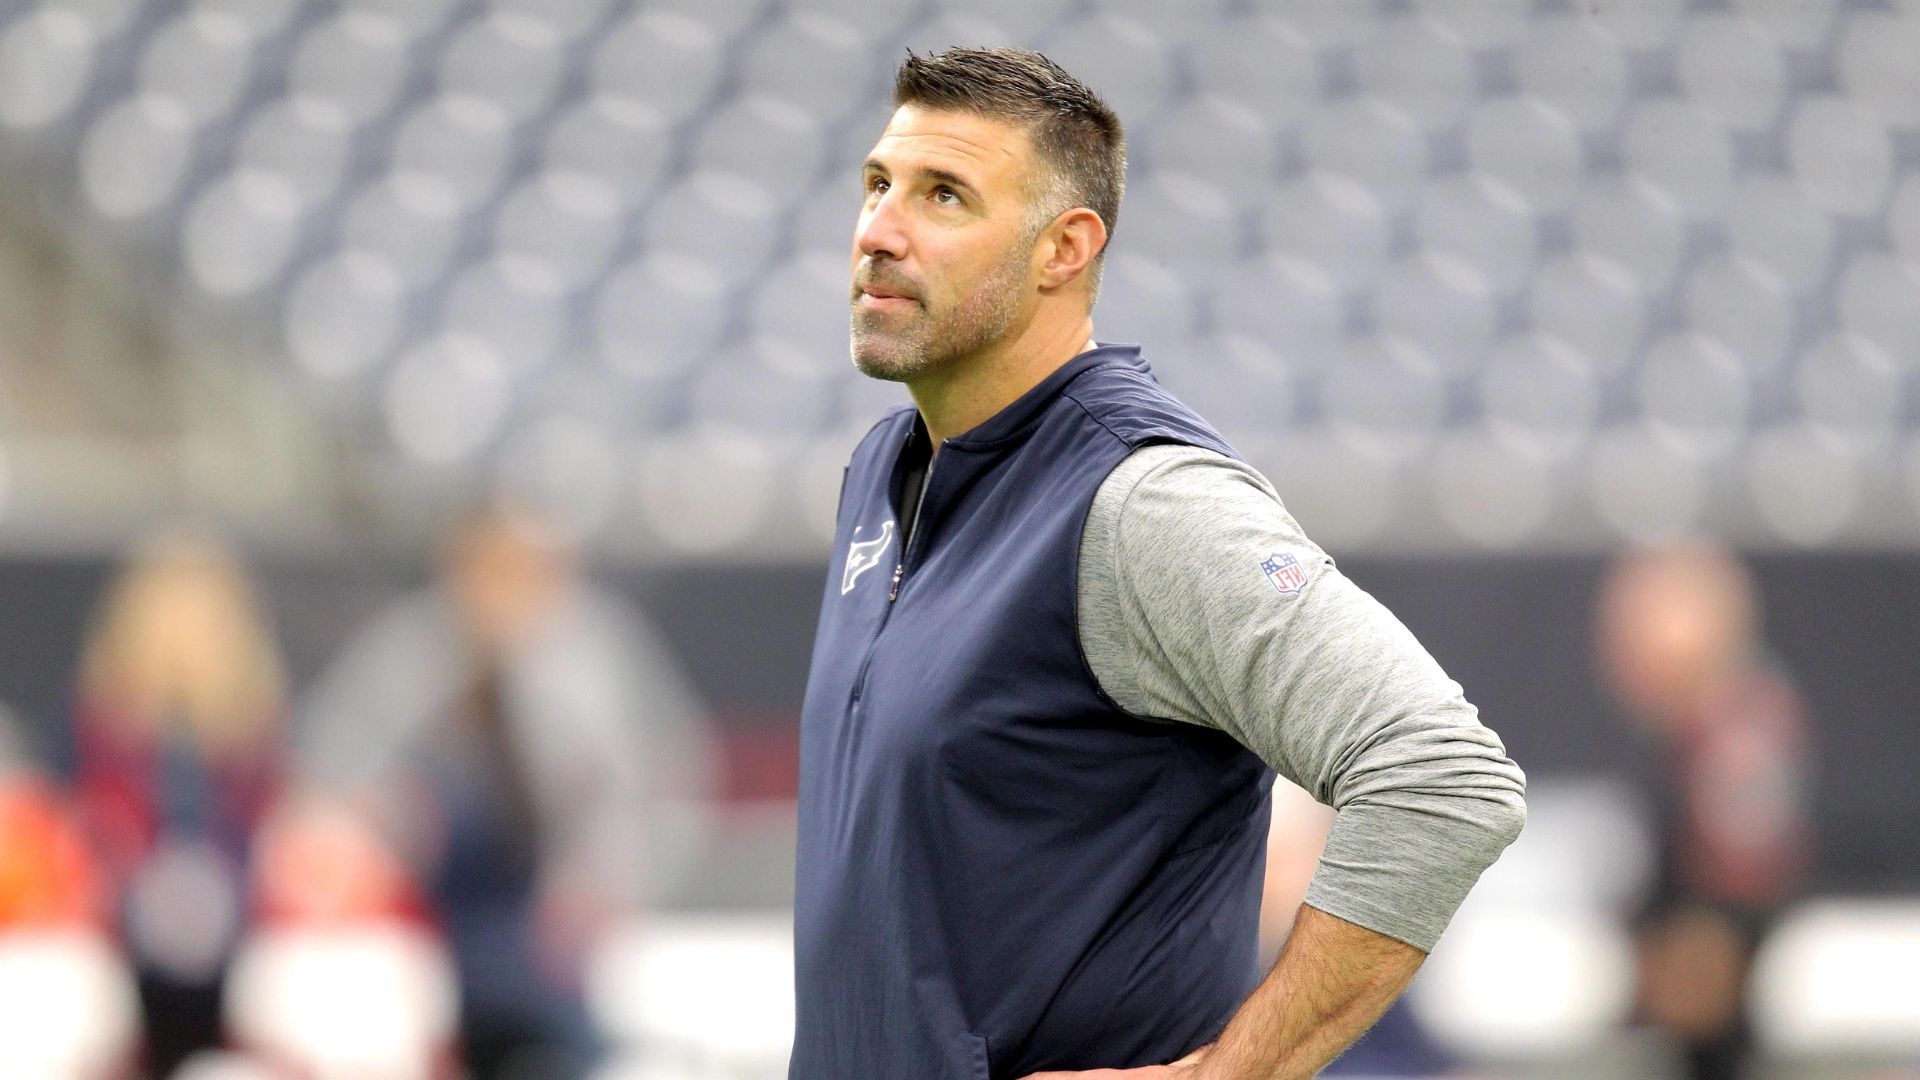 Meet Mike Vrabel Wife: Analyzing The Loss To The Steelers